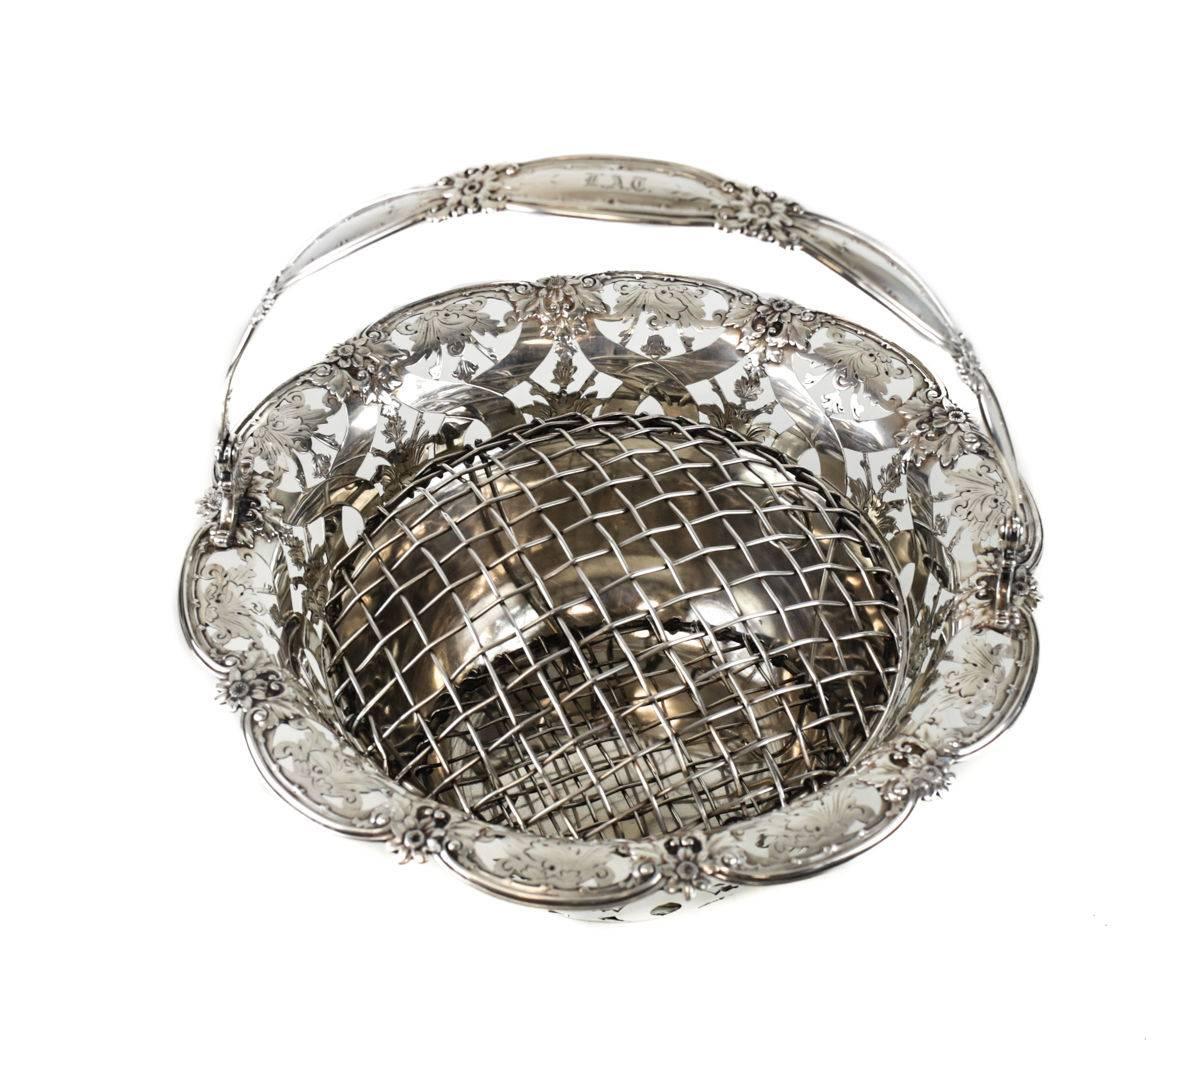 Tiffany & Co makers sterling silver flower basket #16201, John C. Moore. Beautiful open work hand chased florals throughout the interior of the basket and handle. Monogrammed 